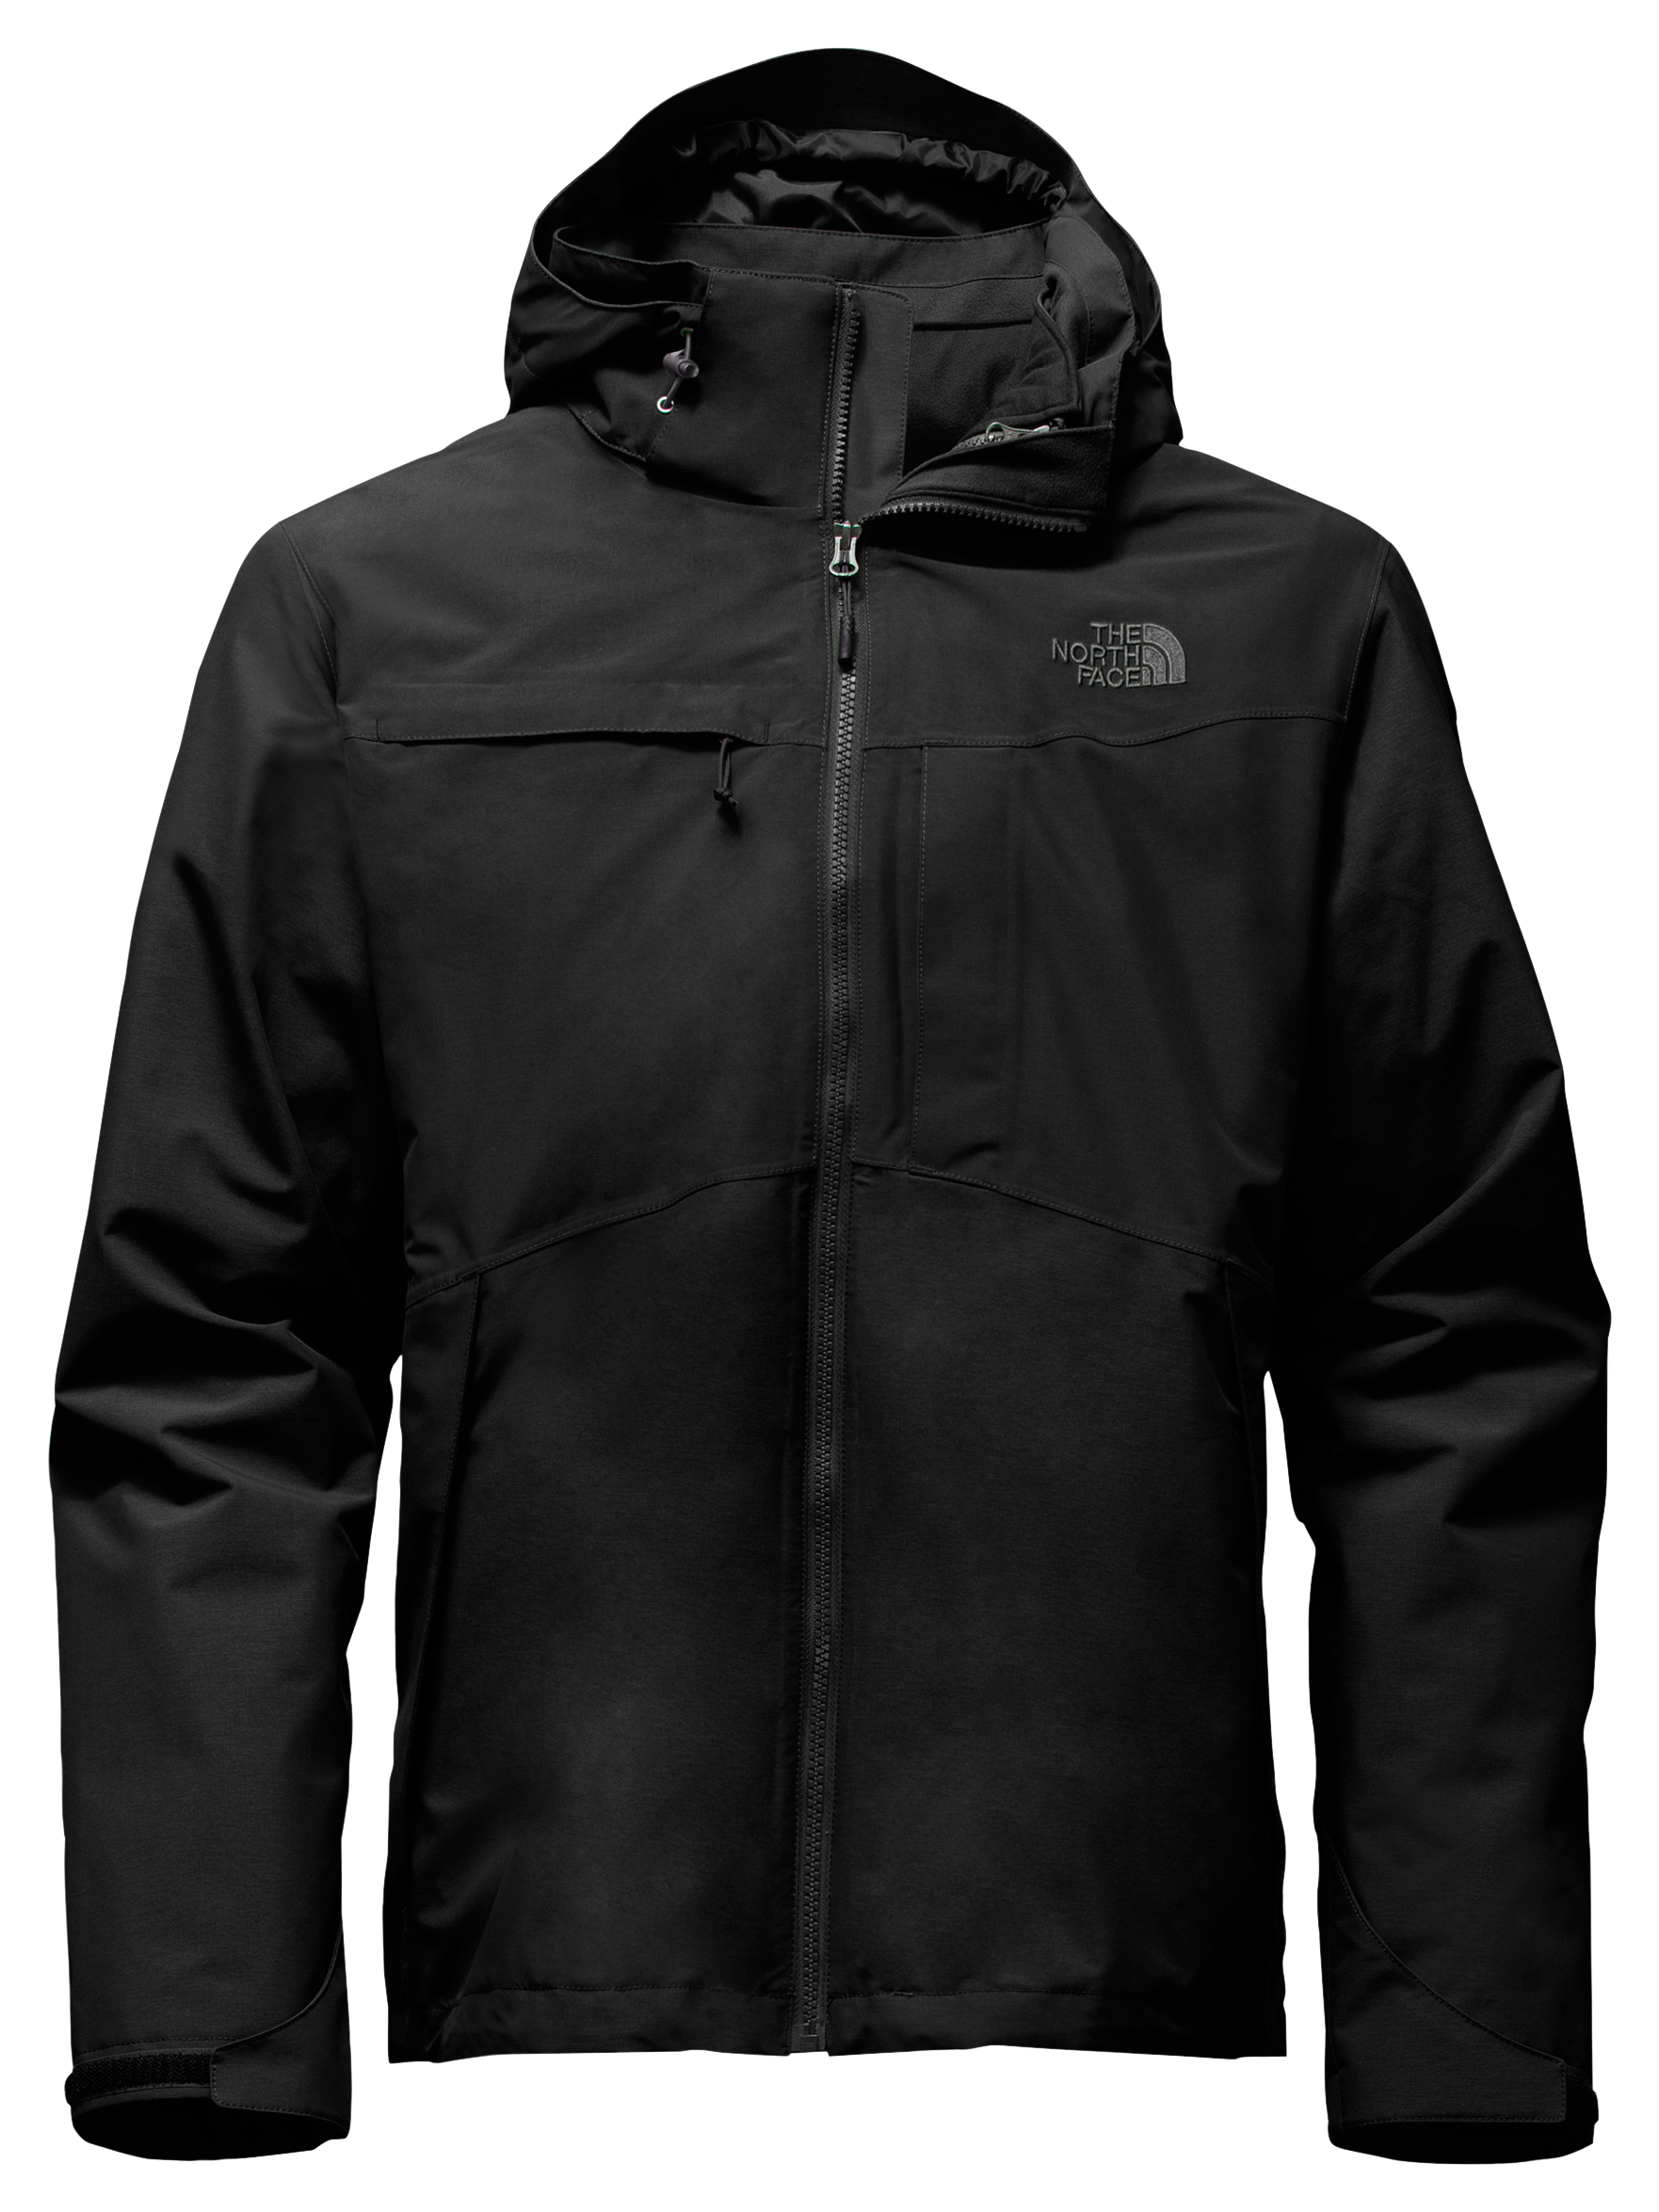 The North Face Condor Triclimate Jacket for Men | Bass Pro Shops